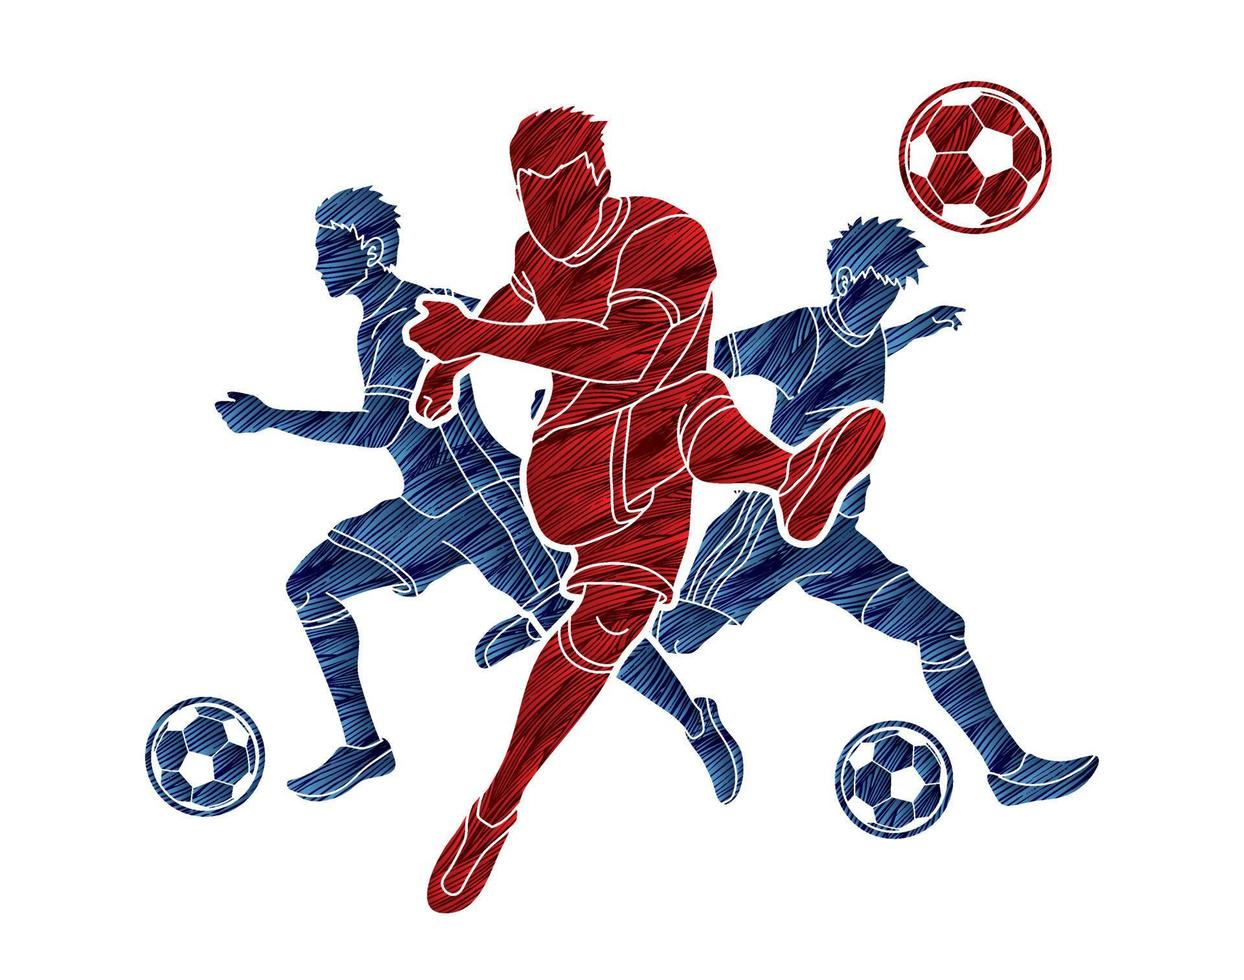 Silhouette Group of  Soccer Players Action vector